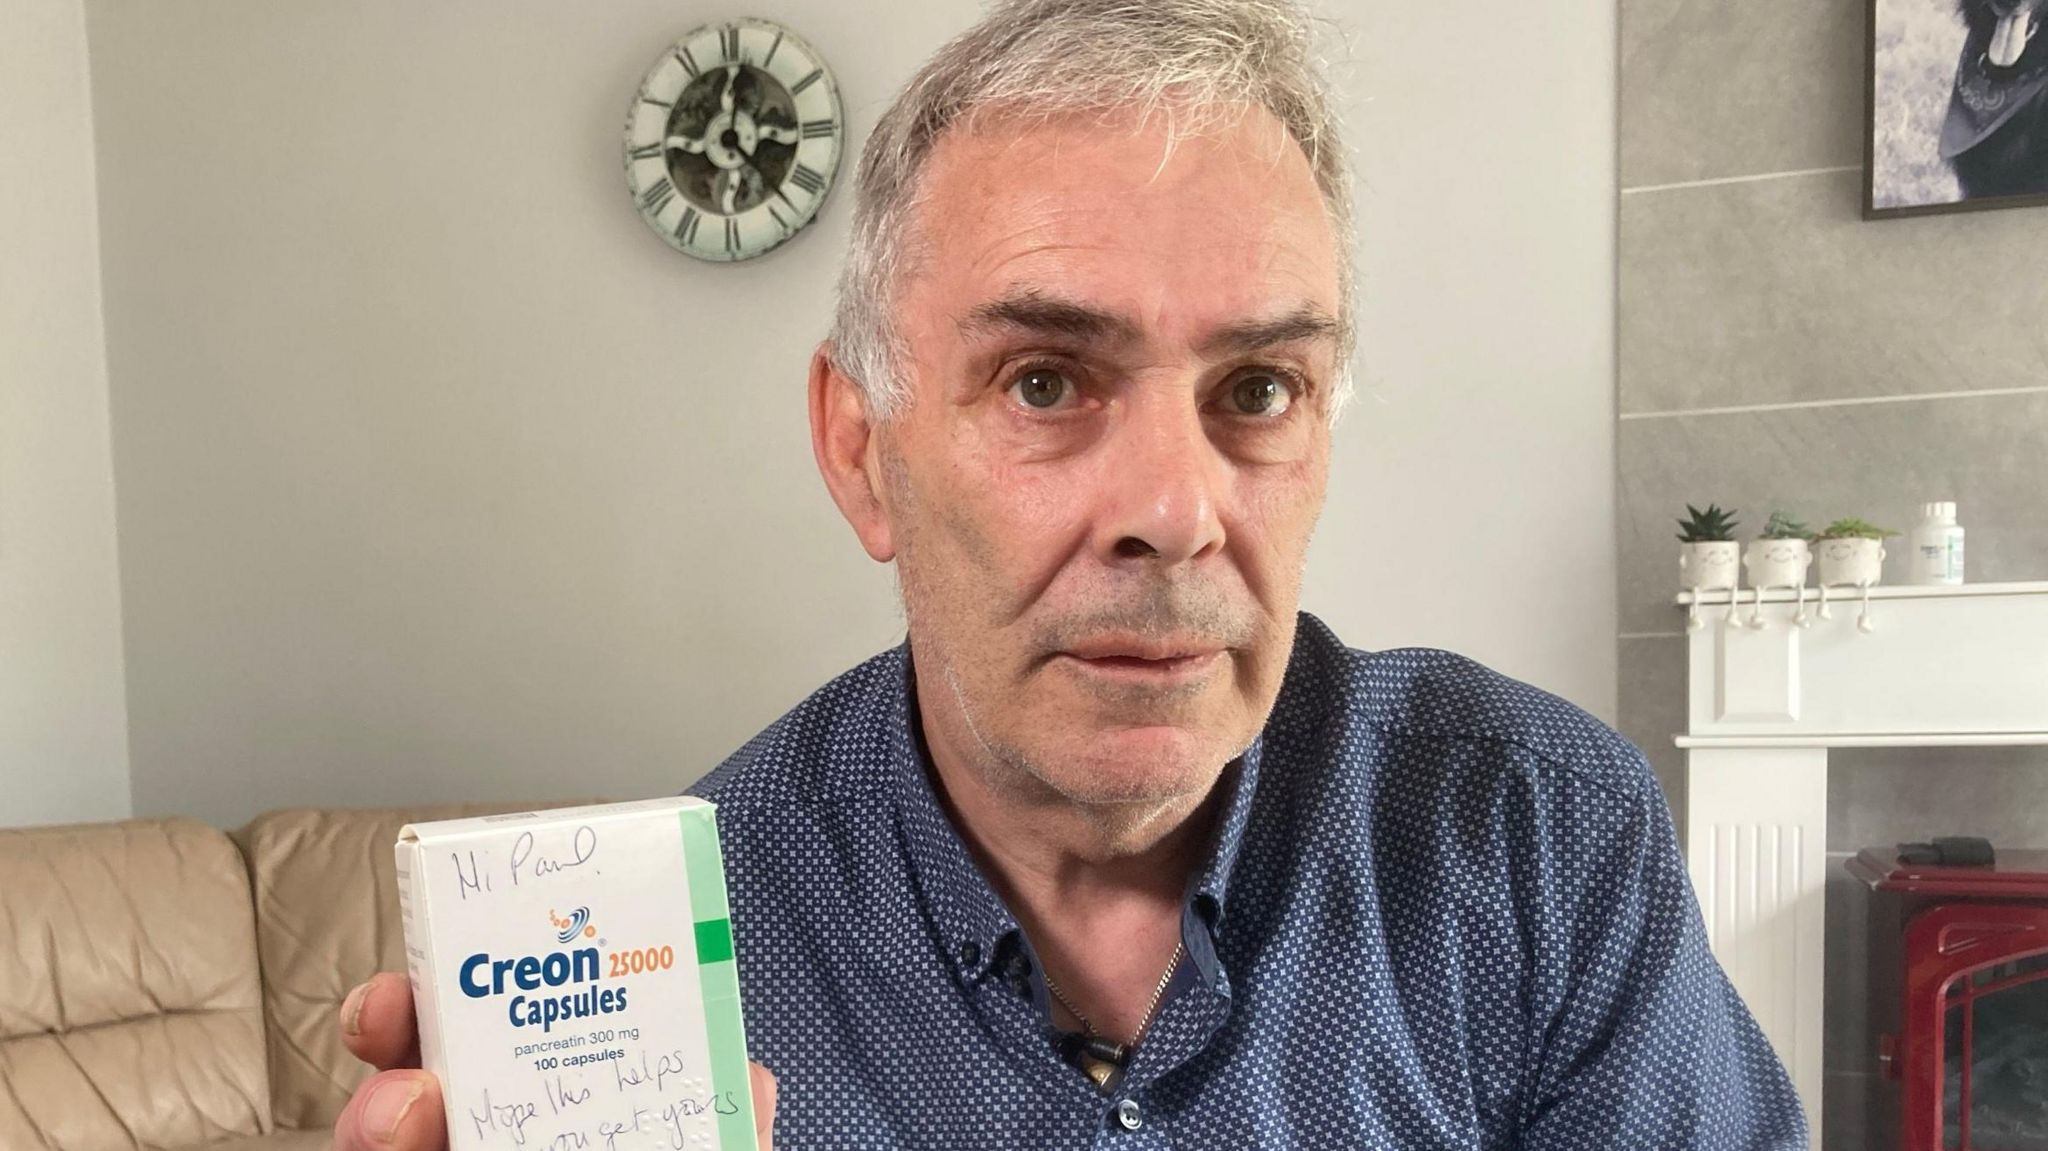 Paul Elcombe with a pack of the Creon capsules he needs to take